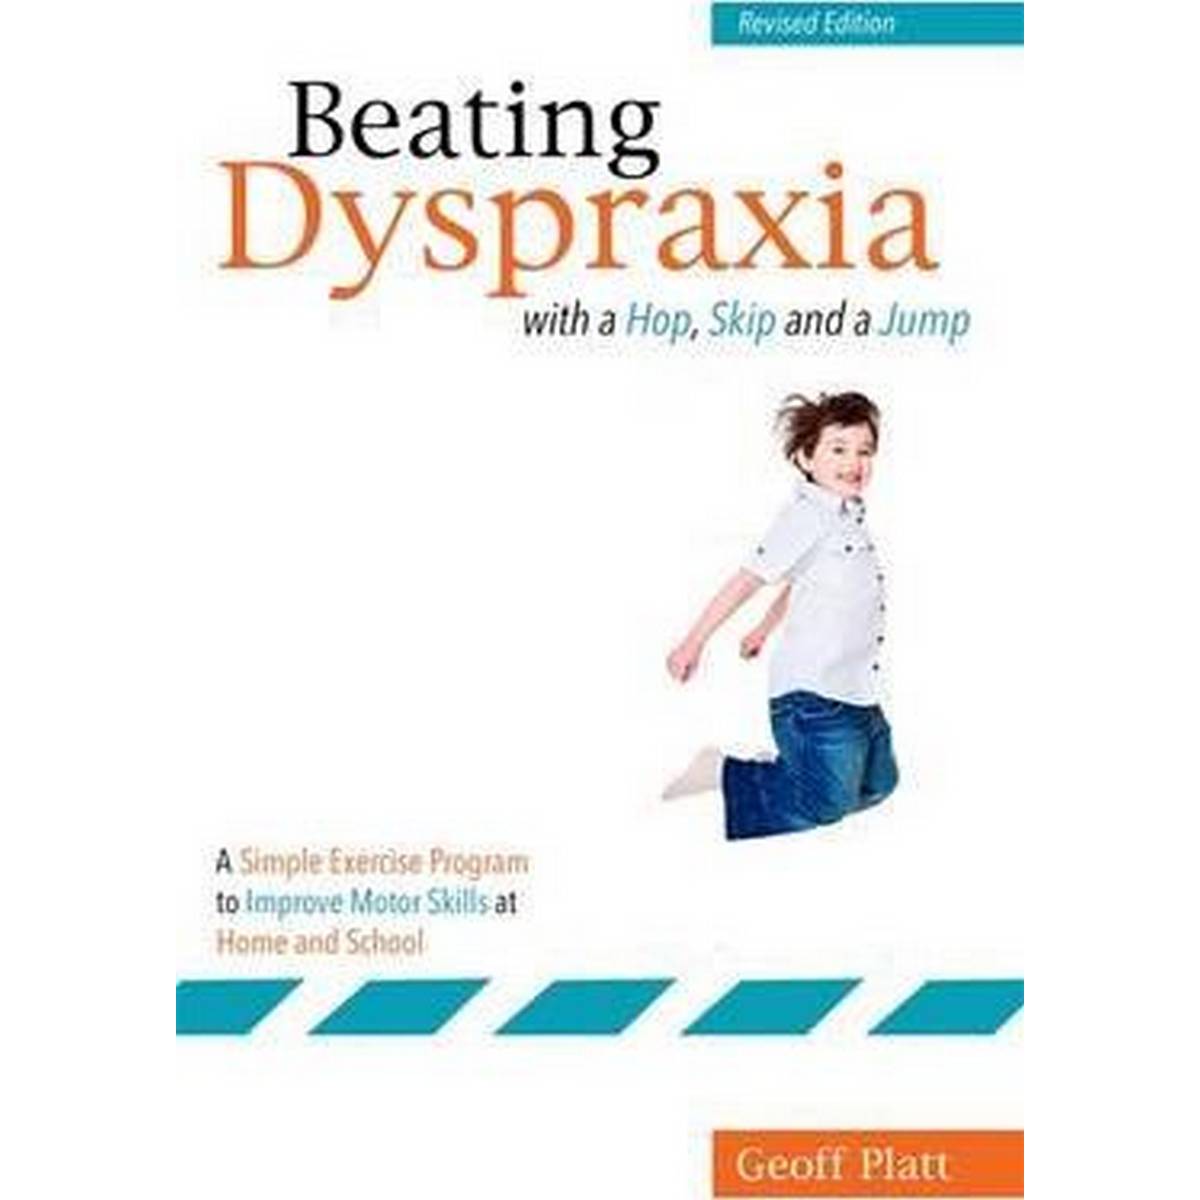 Beating Dyspraxia with a Hop, Skip and a Jump : A Simple Exercise Program to Improve Motor Skills at Home and School